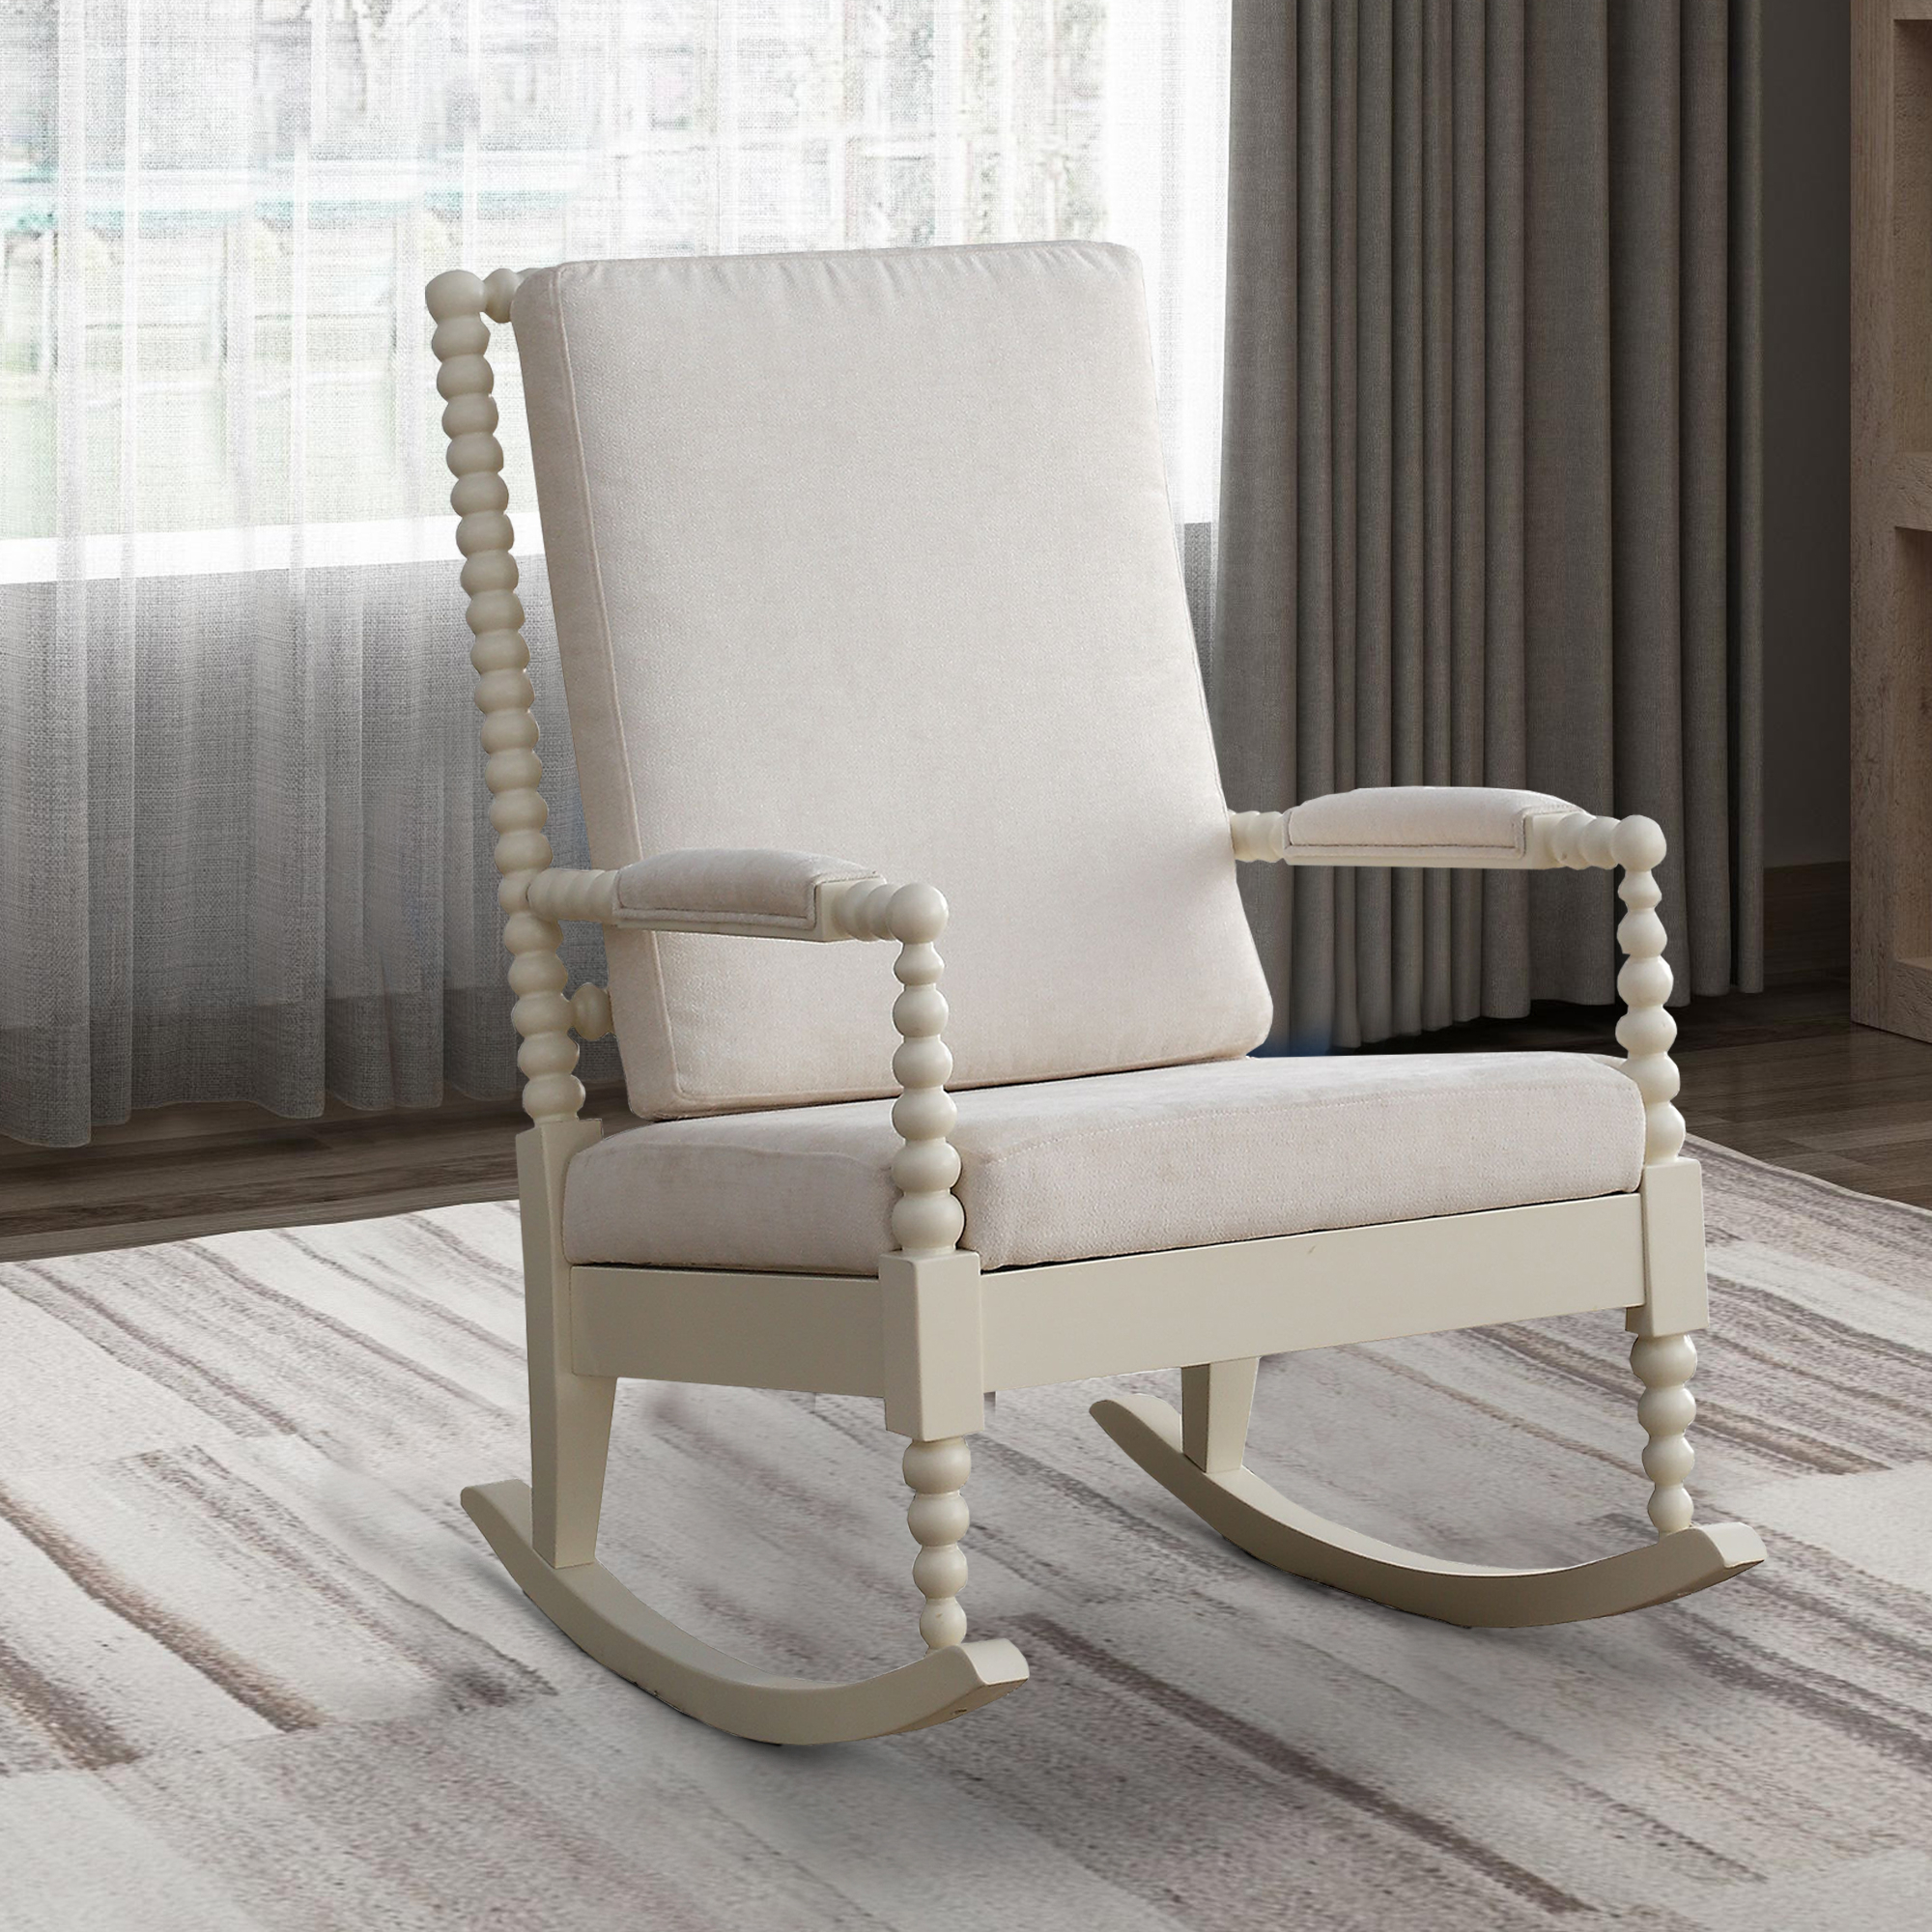 Wooden Rocking Chair With Fabric Upholstered Cushions, White- Saltoro Sherpi